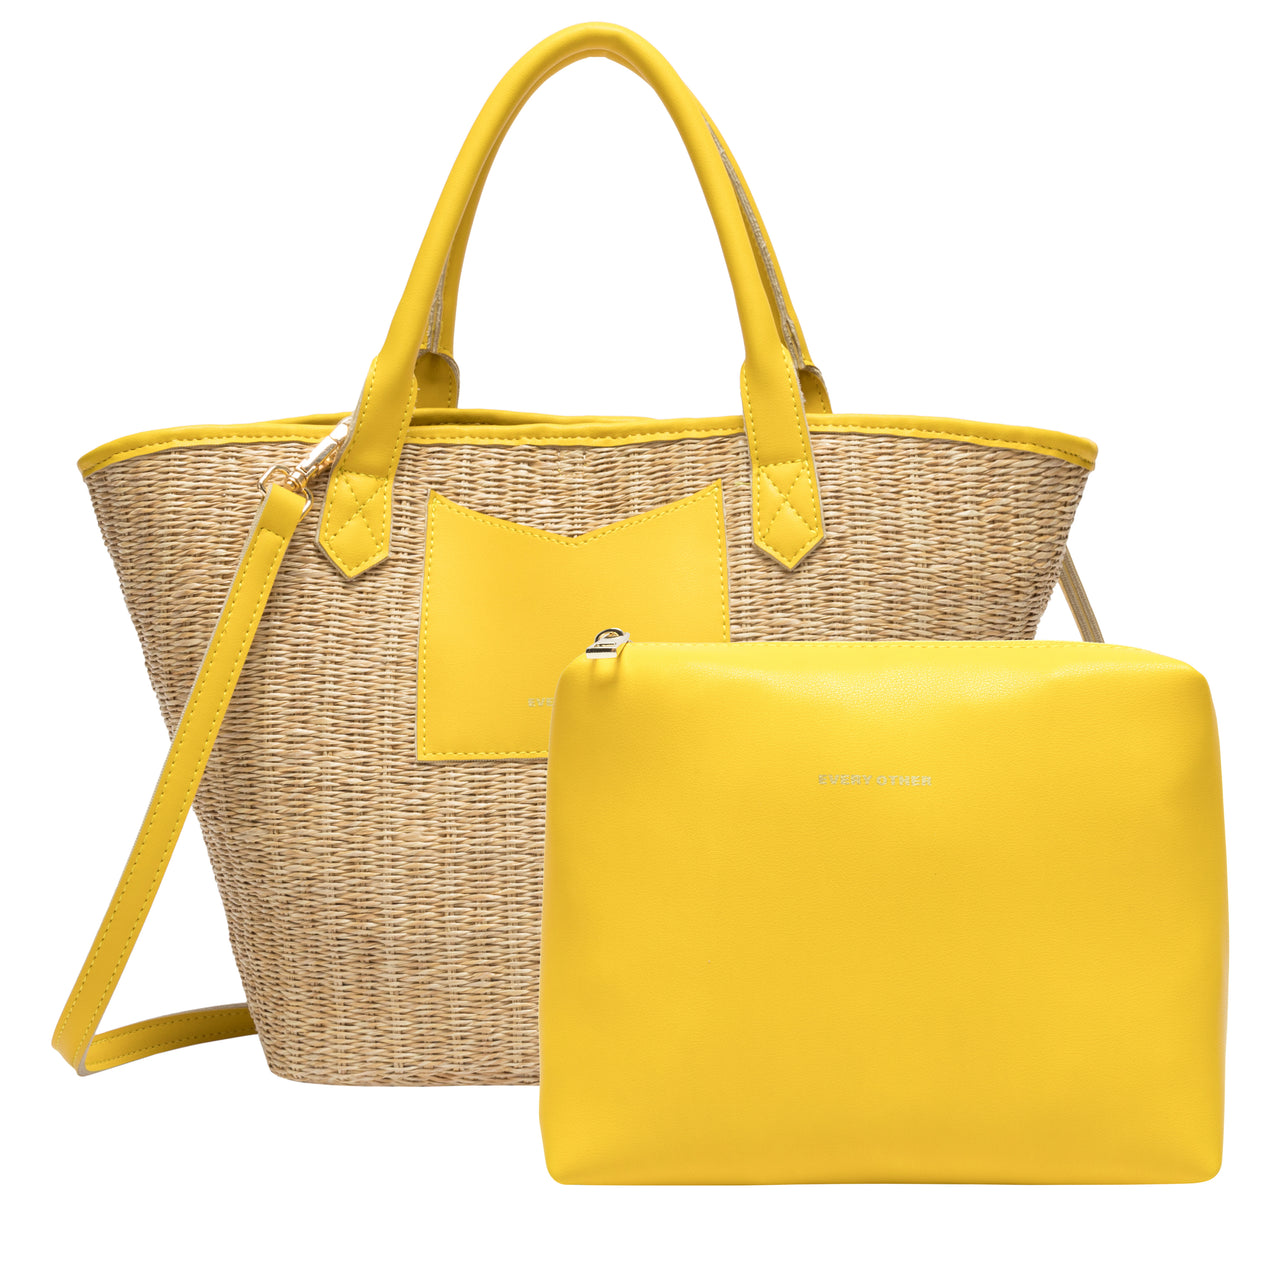 Every Other Large Twin Tote Bag - Yellow